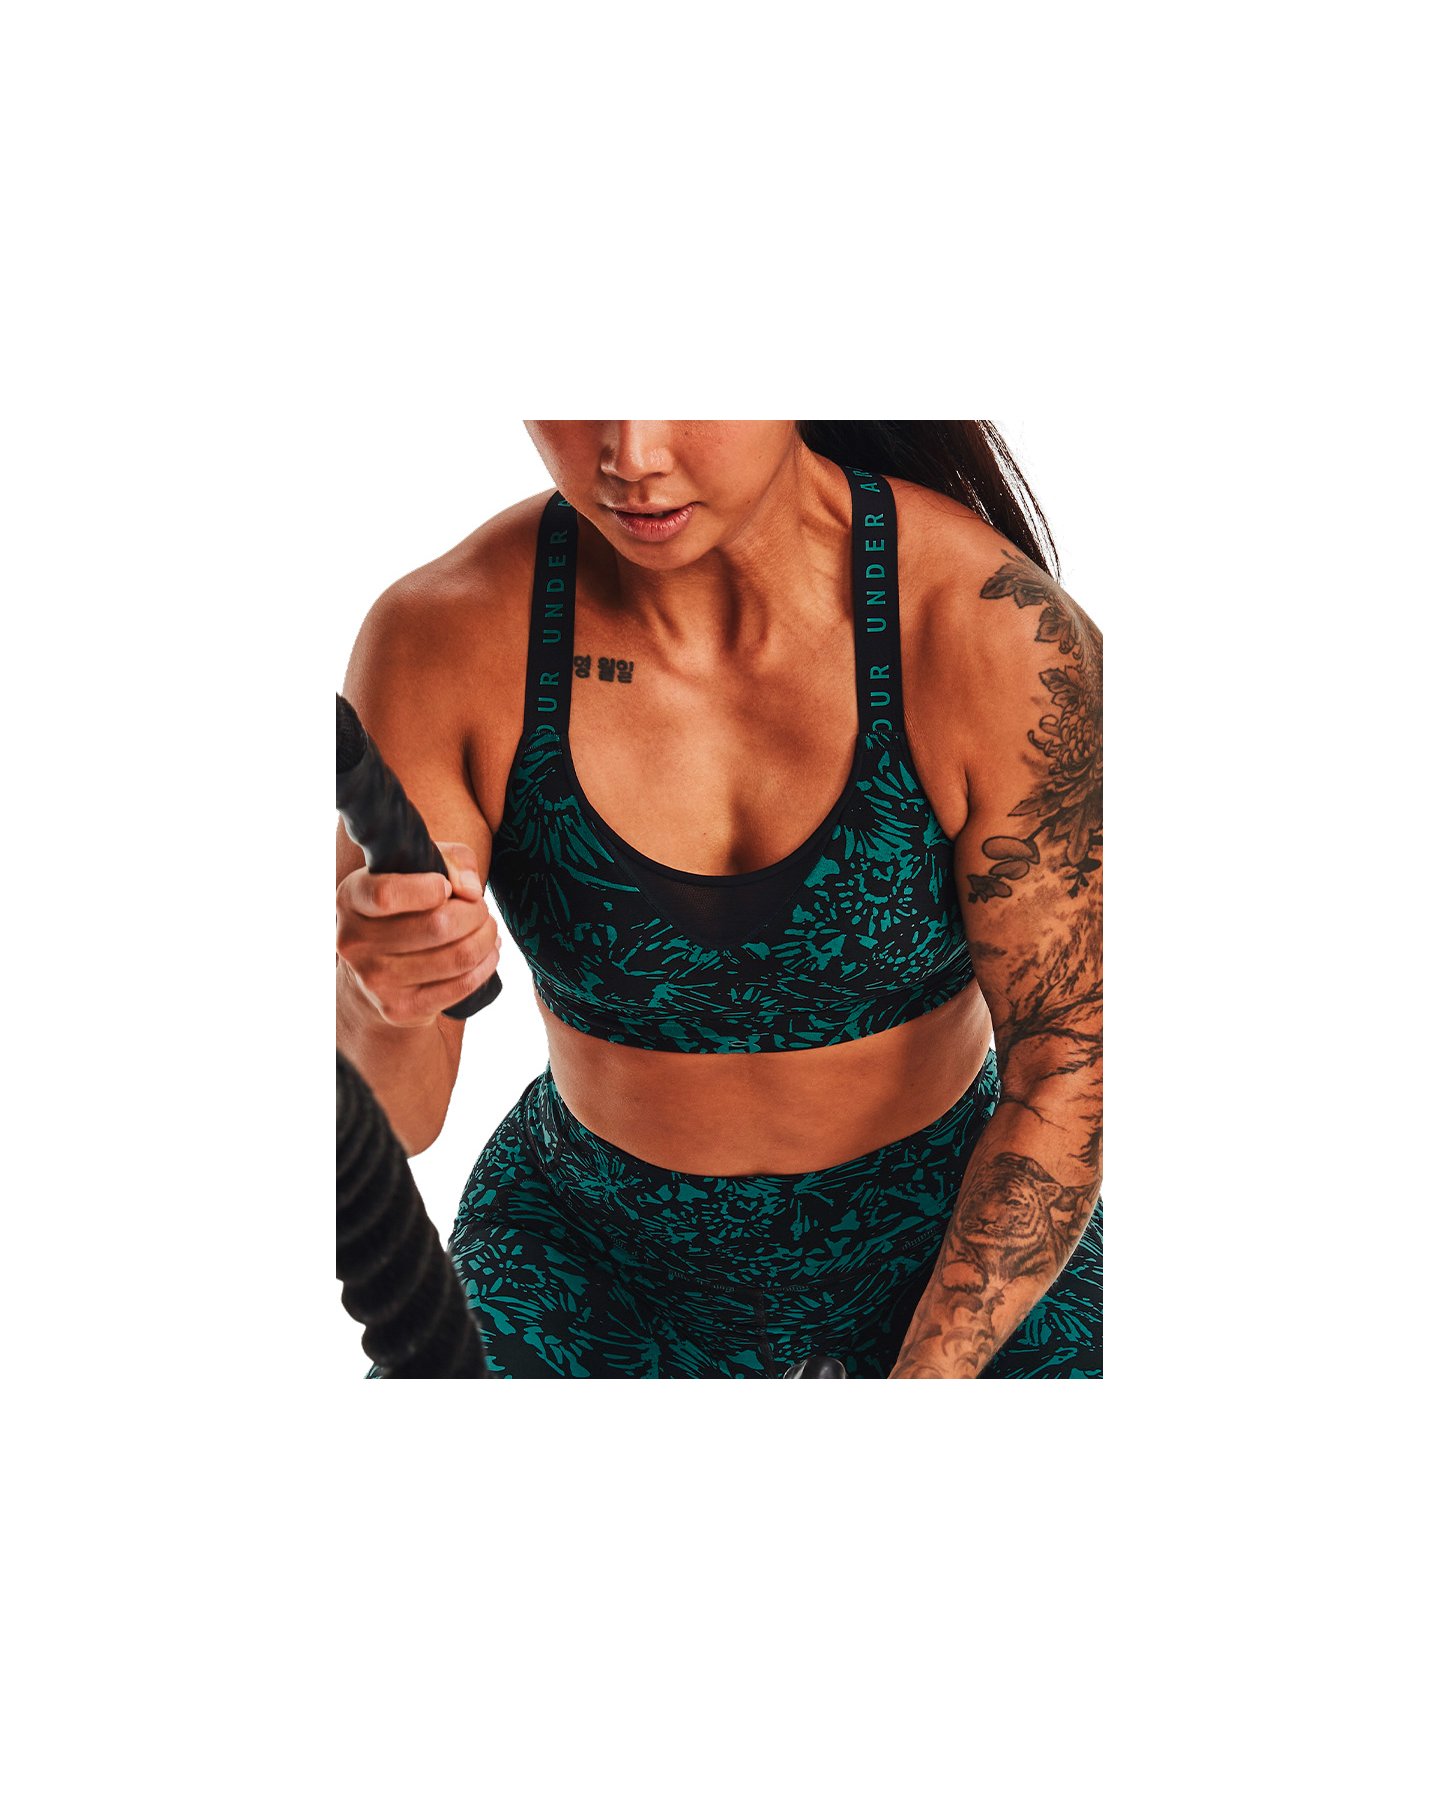 Women's Sports Bra with Optional Chest Protection Inserts – ProBlock Sports